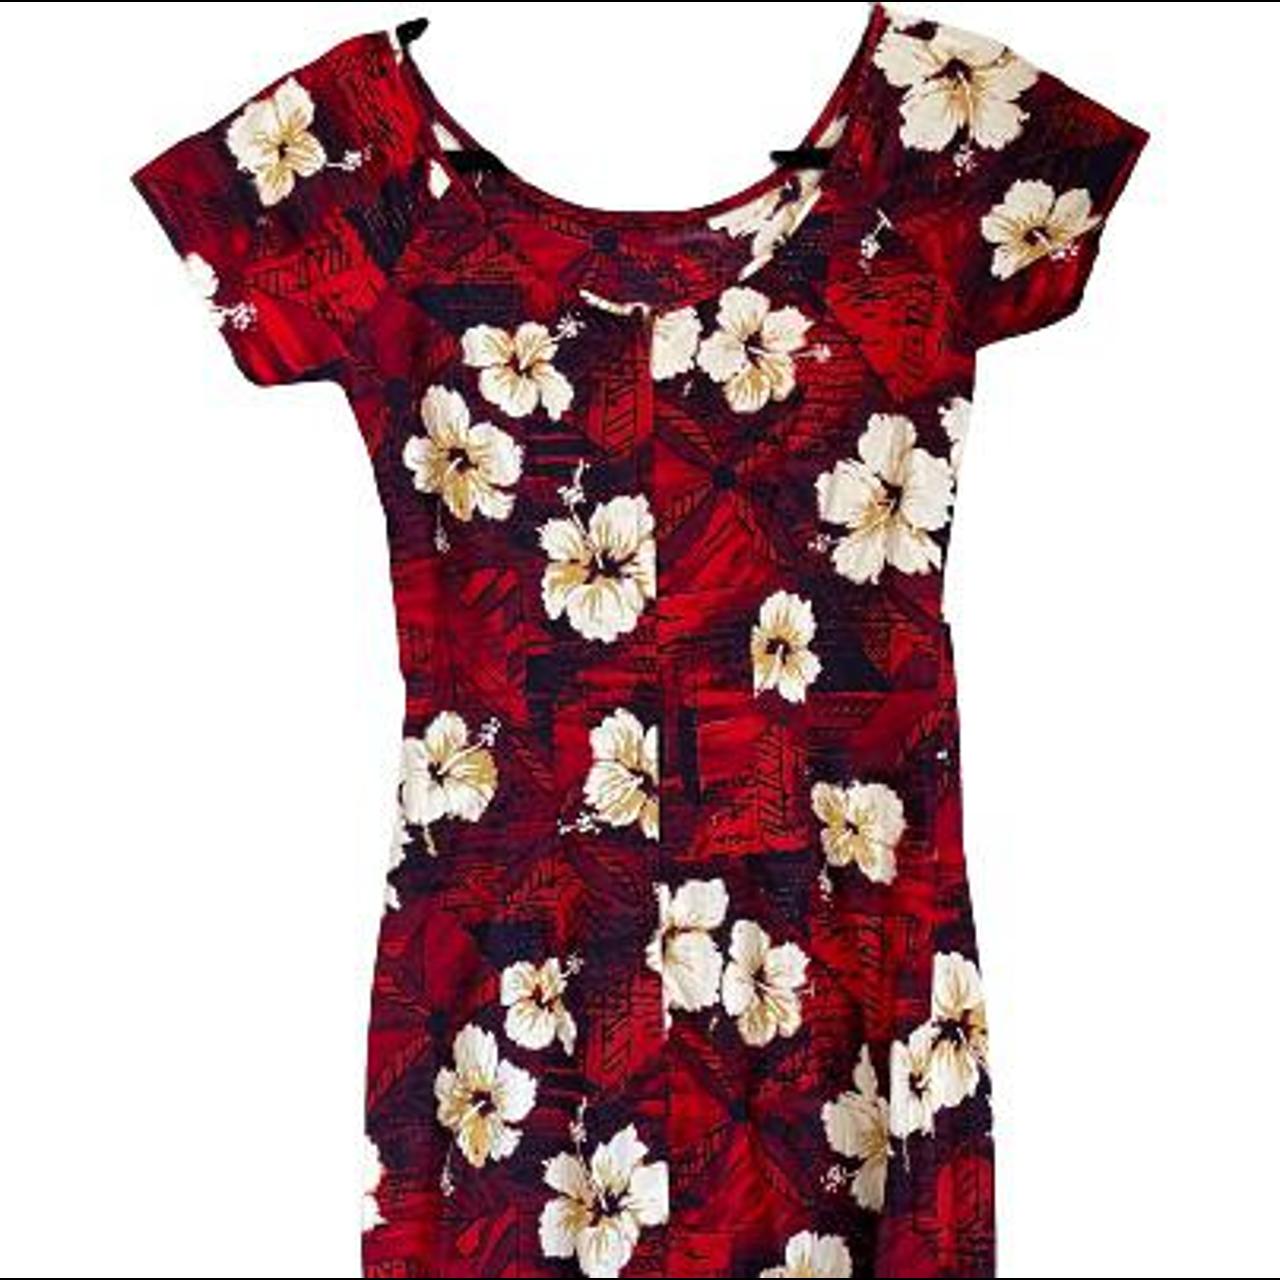 Product Image 1 - Vintage Floral Maxi 

No brand/size